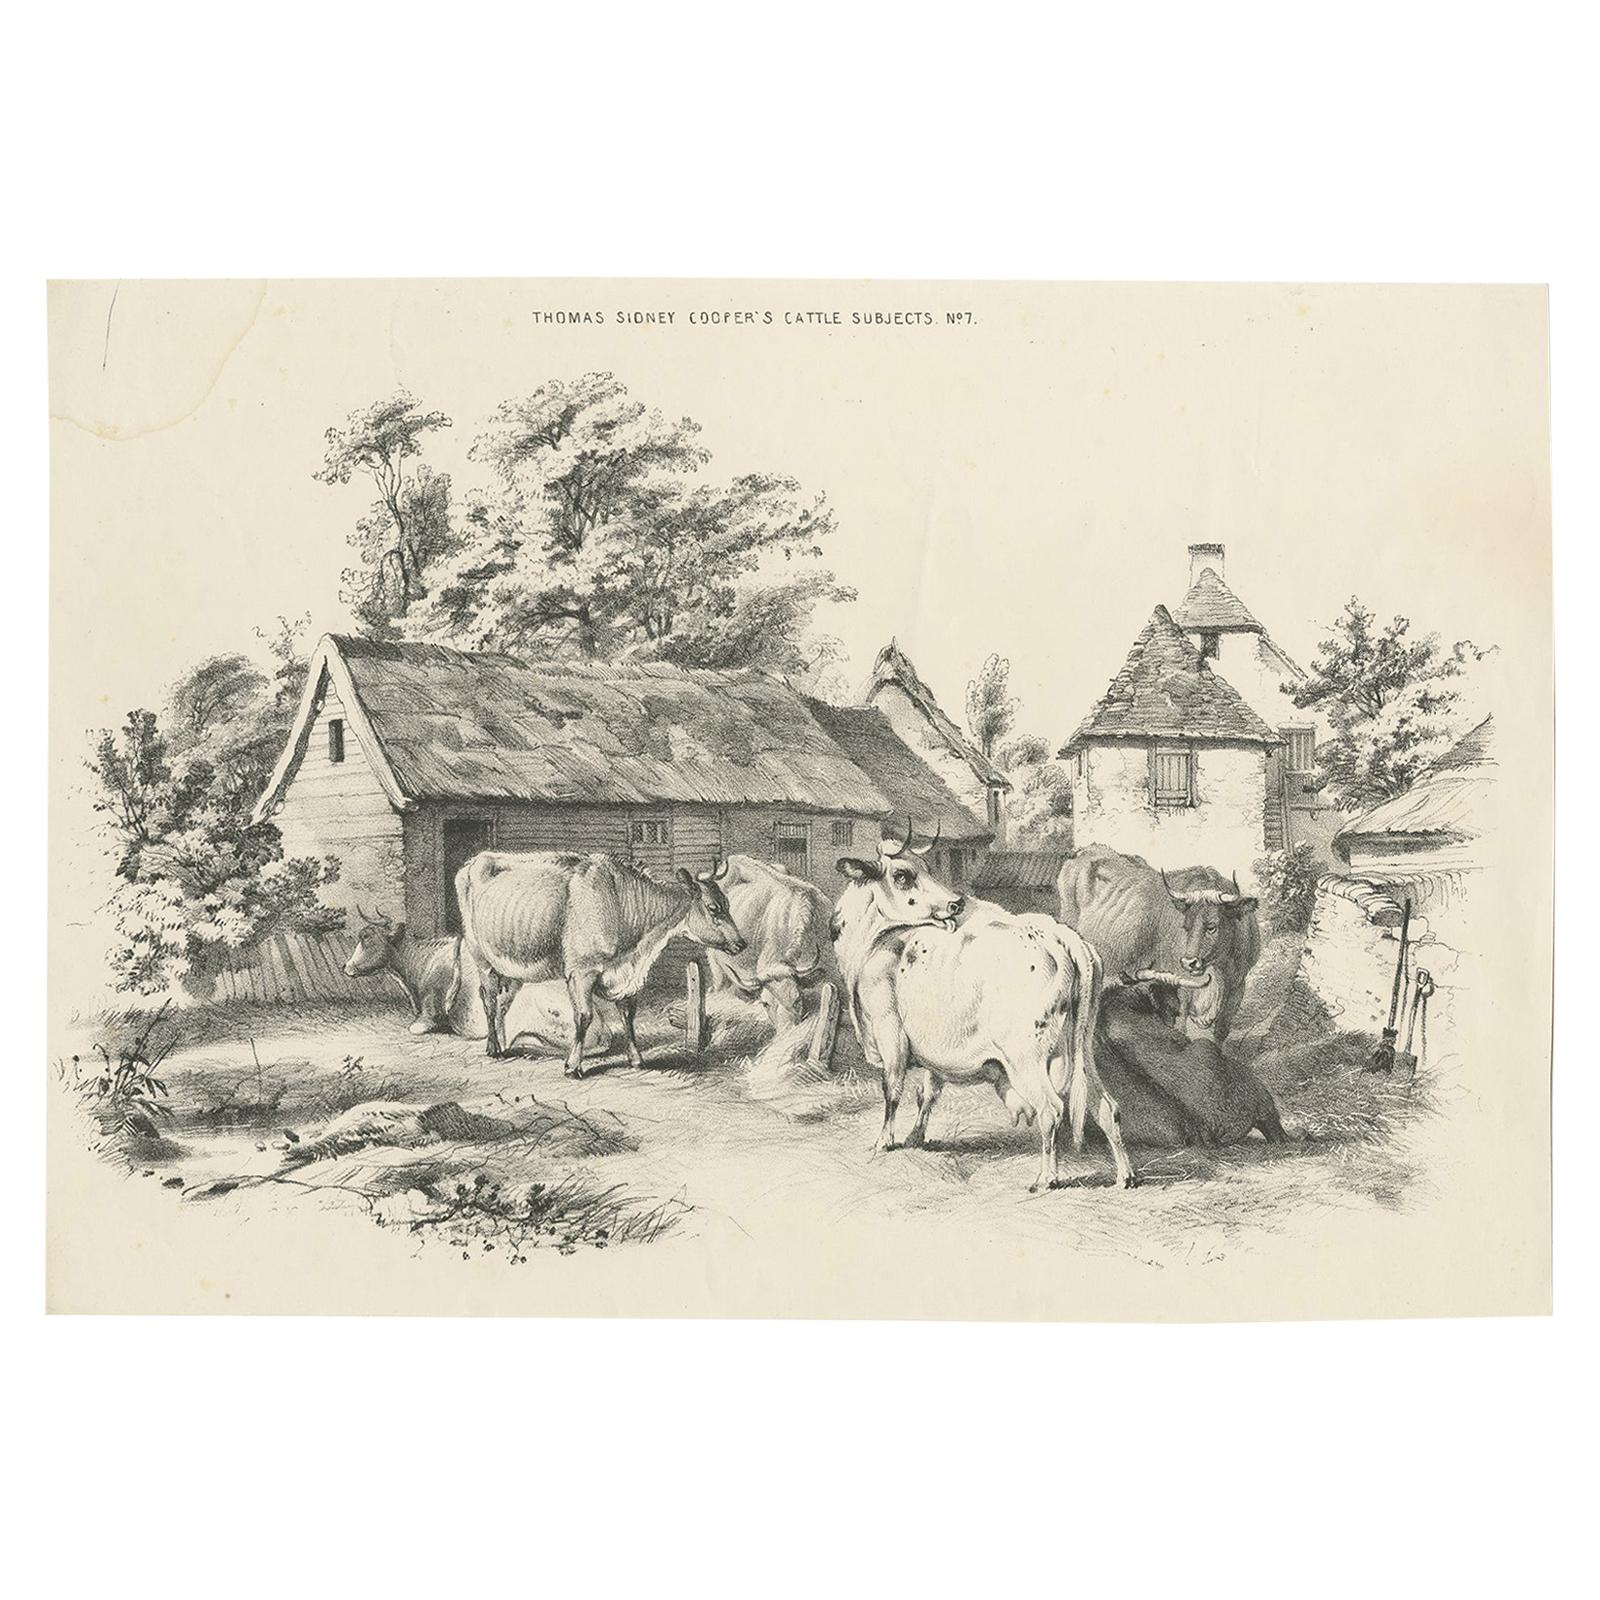 No. 7 Antique Print of Cattle by Cooper